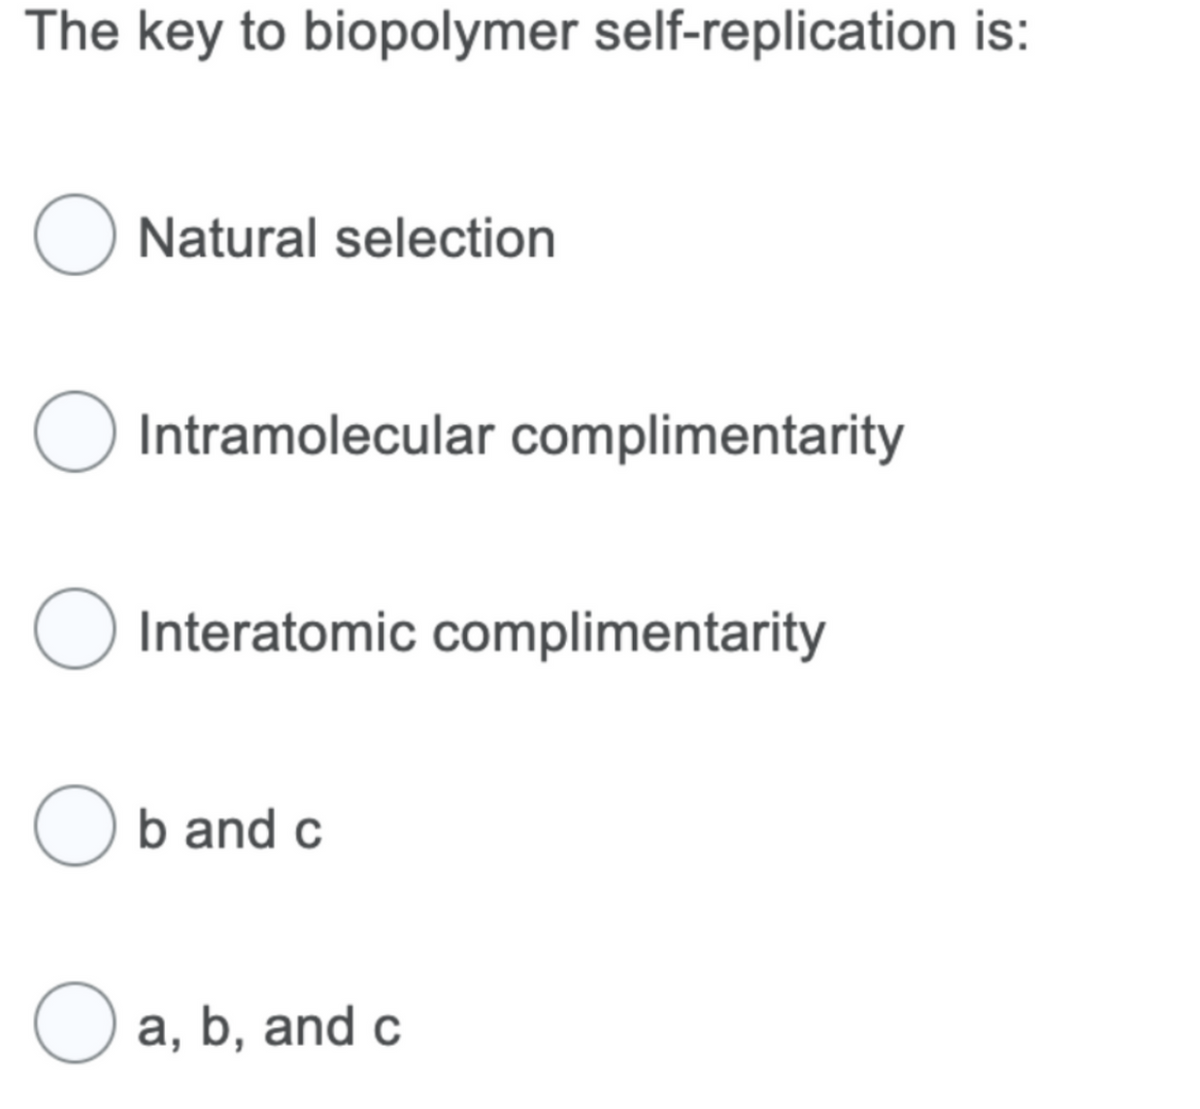 The key to biopolymer self-replication is:
O Natural selection
Intramolecular complimentarity
O Interatomic complimentarity
Ob and c
O a, b, and c